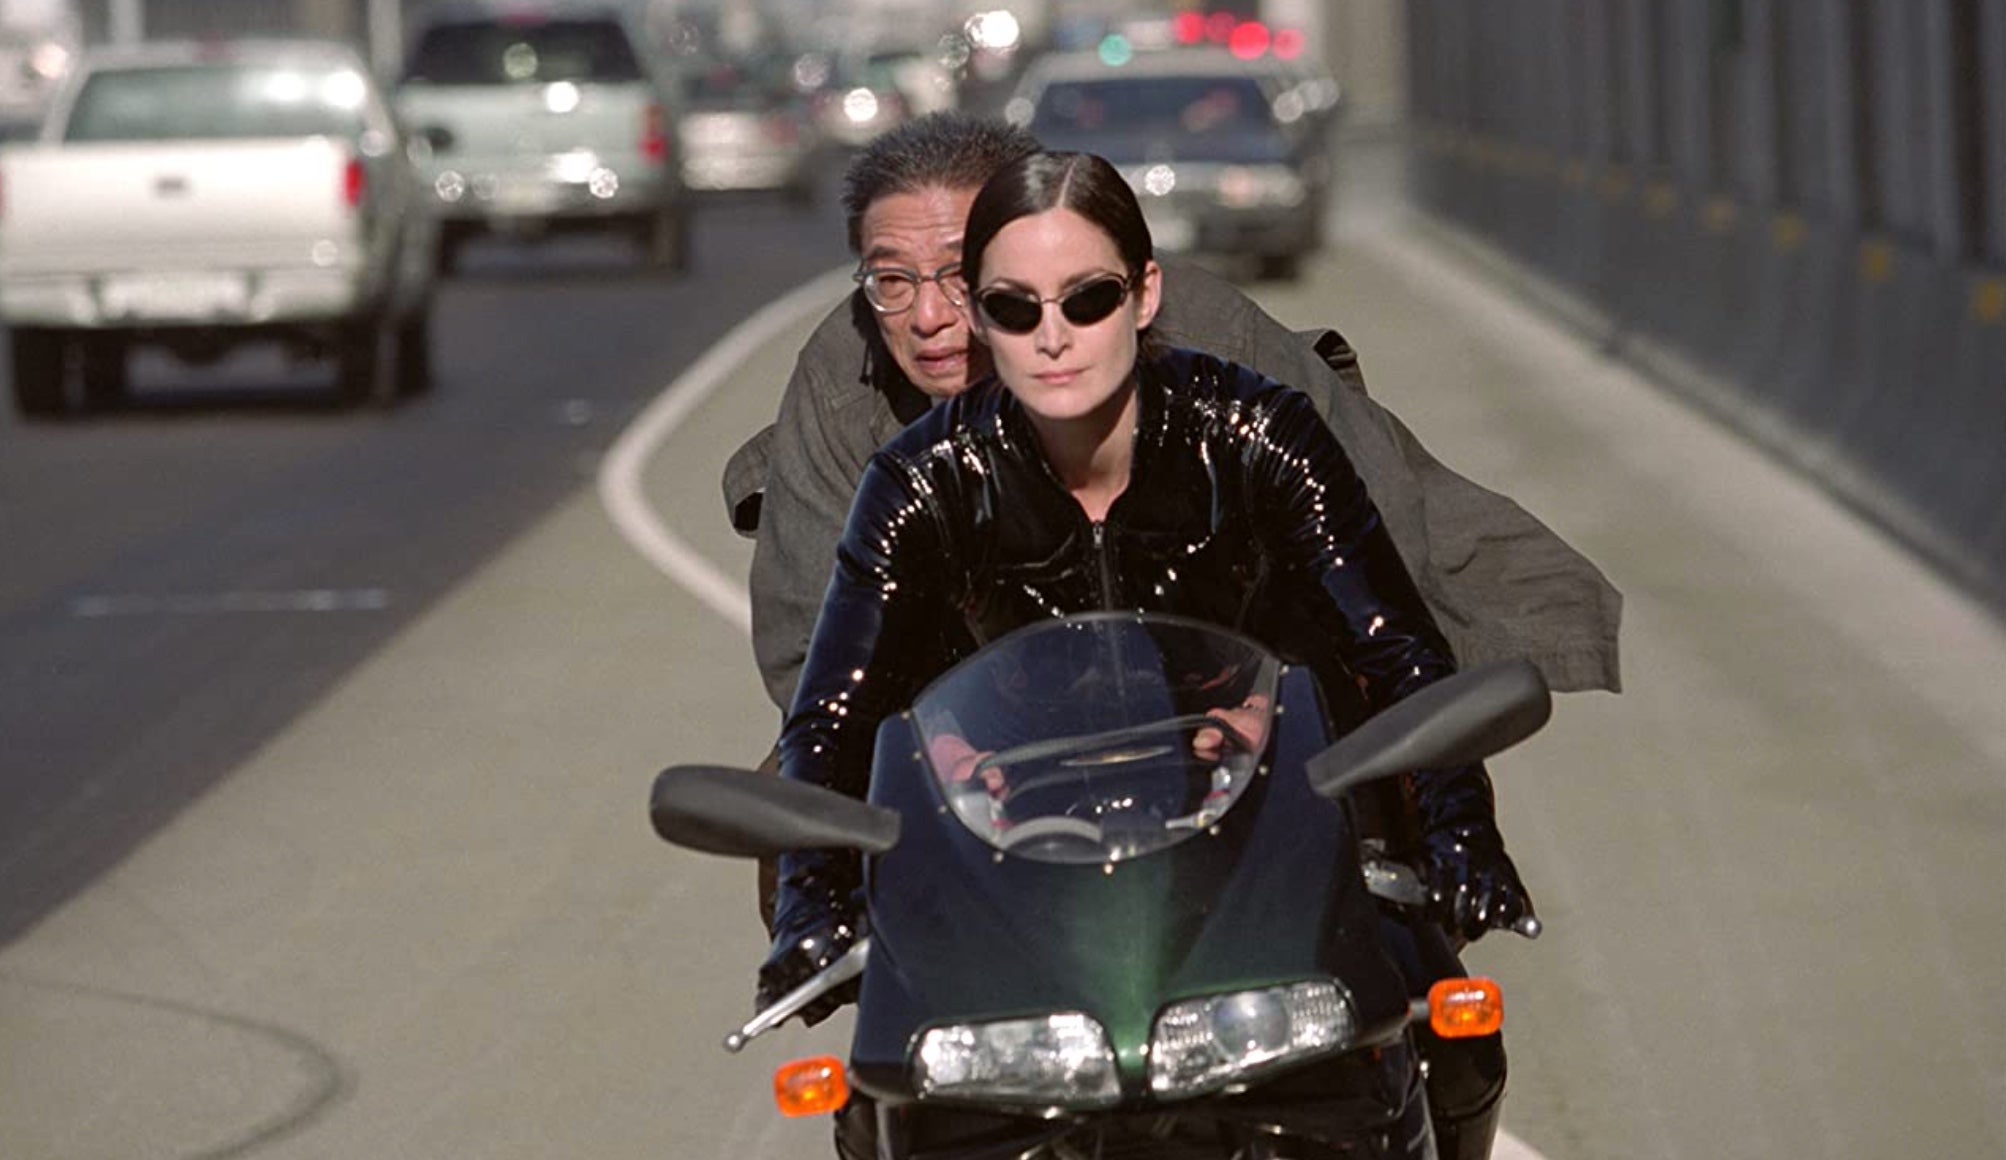 Trinity (Carrie-Anne Moss) and the Key Maker (Randall Duk Kim) riding down the highway. (Image: Warner Bros.)